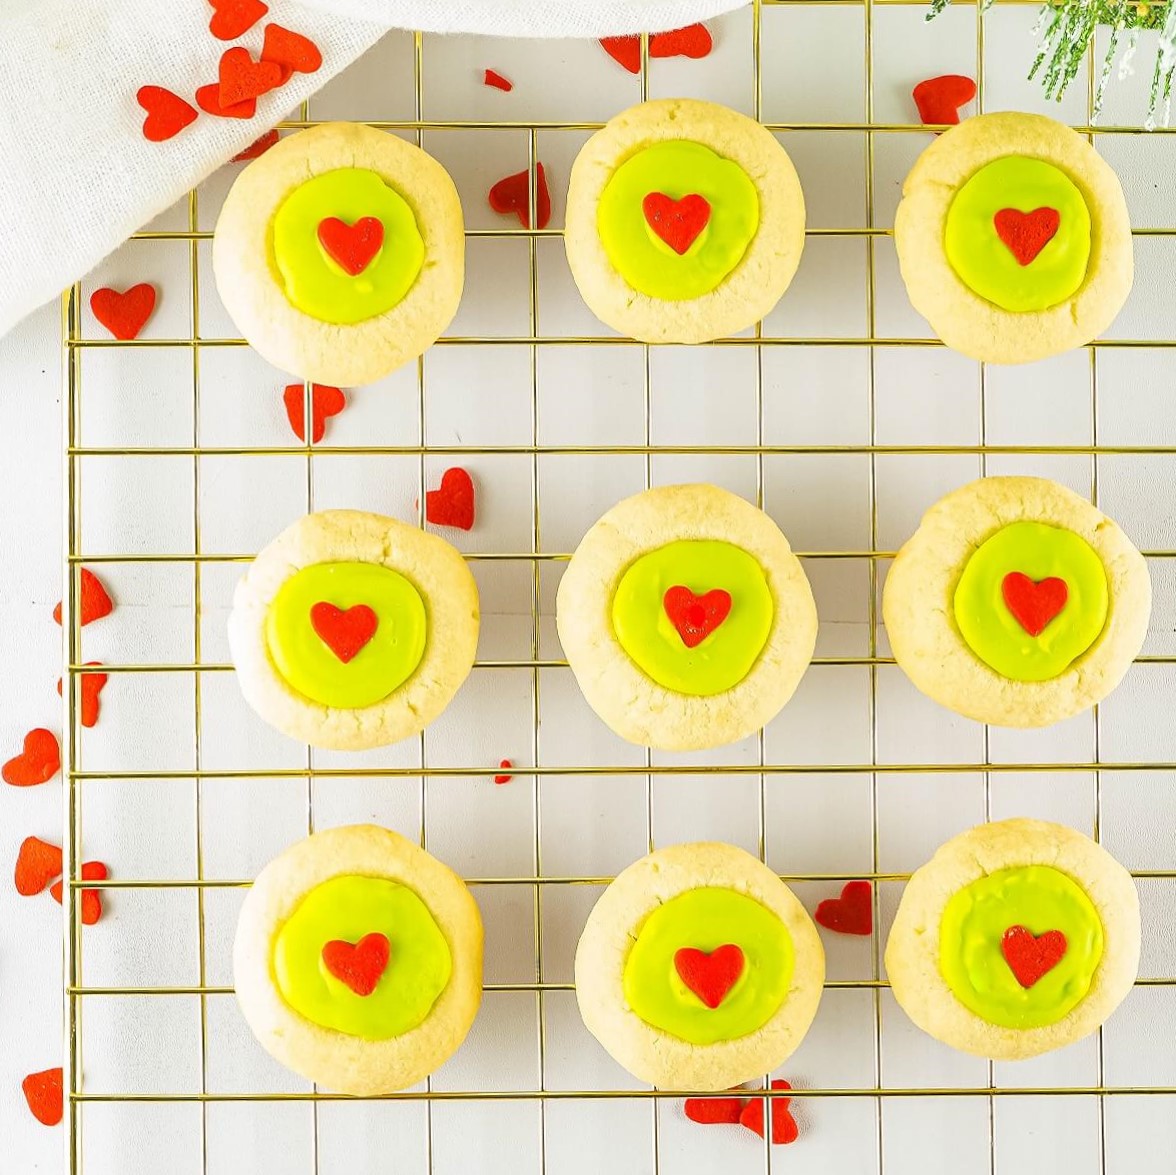 Golden baked thumbprint grinch cookies filled with bright green candy melts and decorated with a red heart on a wire cooling rack.